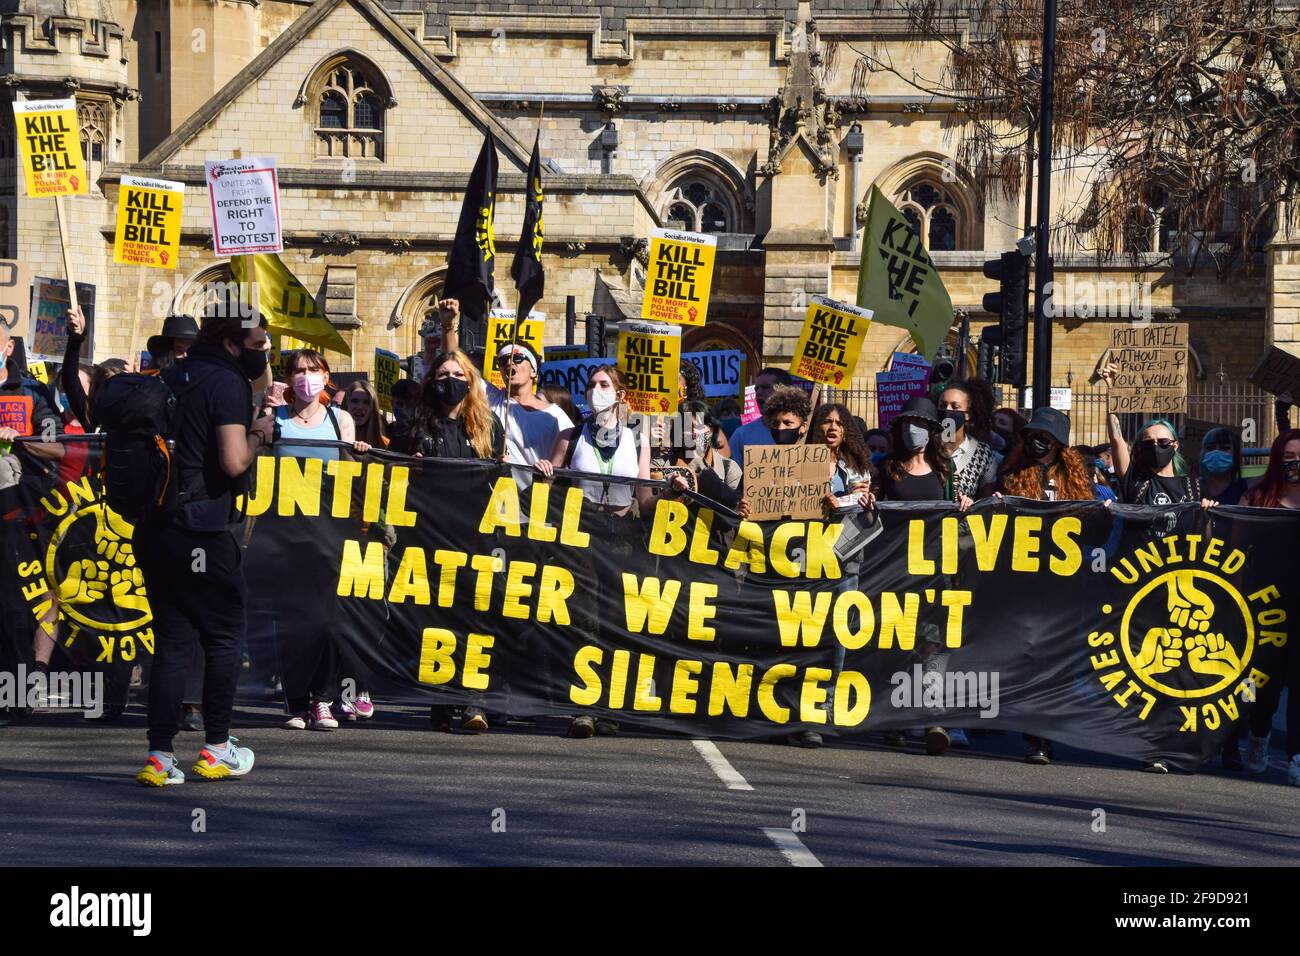 Protesters hold a Black Lives Matter banner and placards during the Kill The Bill demonstration in Parliament Square.Crowds once again marched in protest against the Police, Crime, Sentencing and Courts Bill. Stock Photo